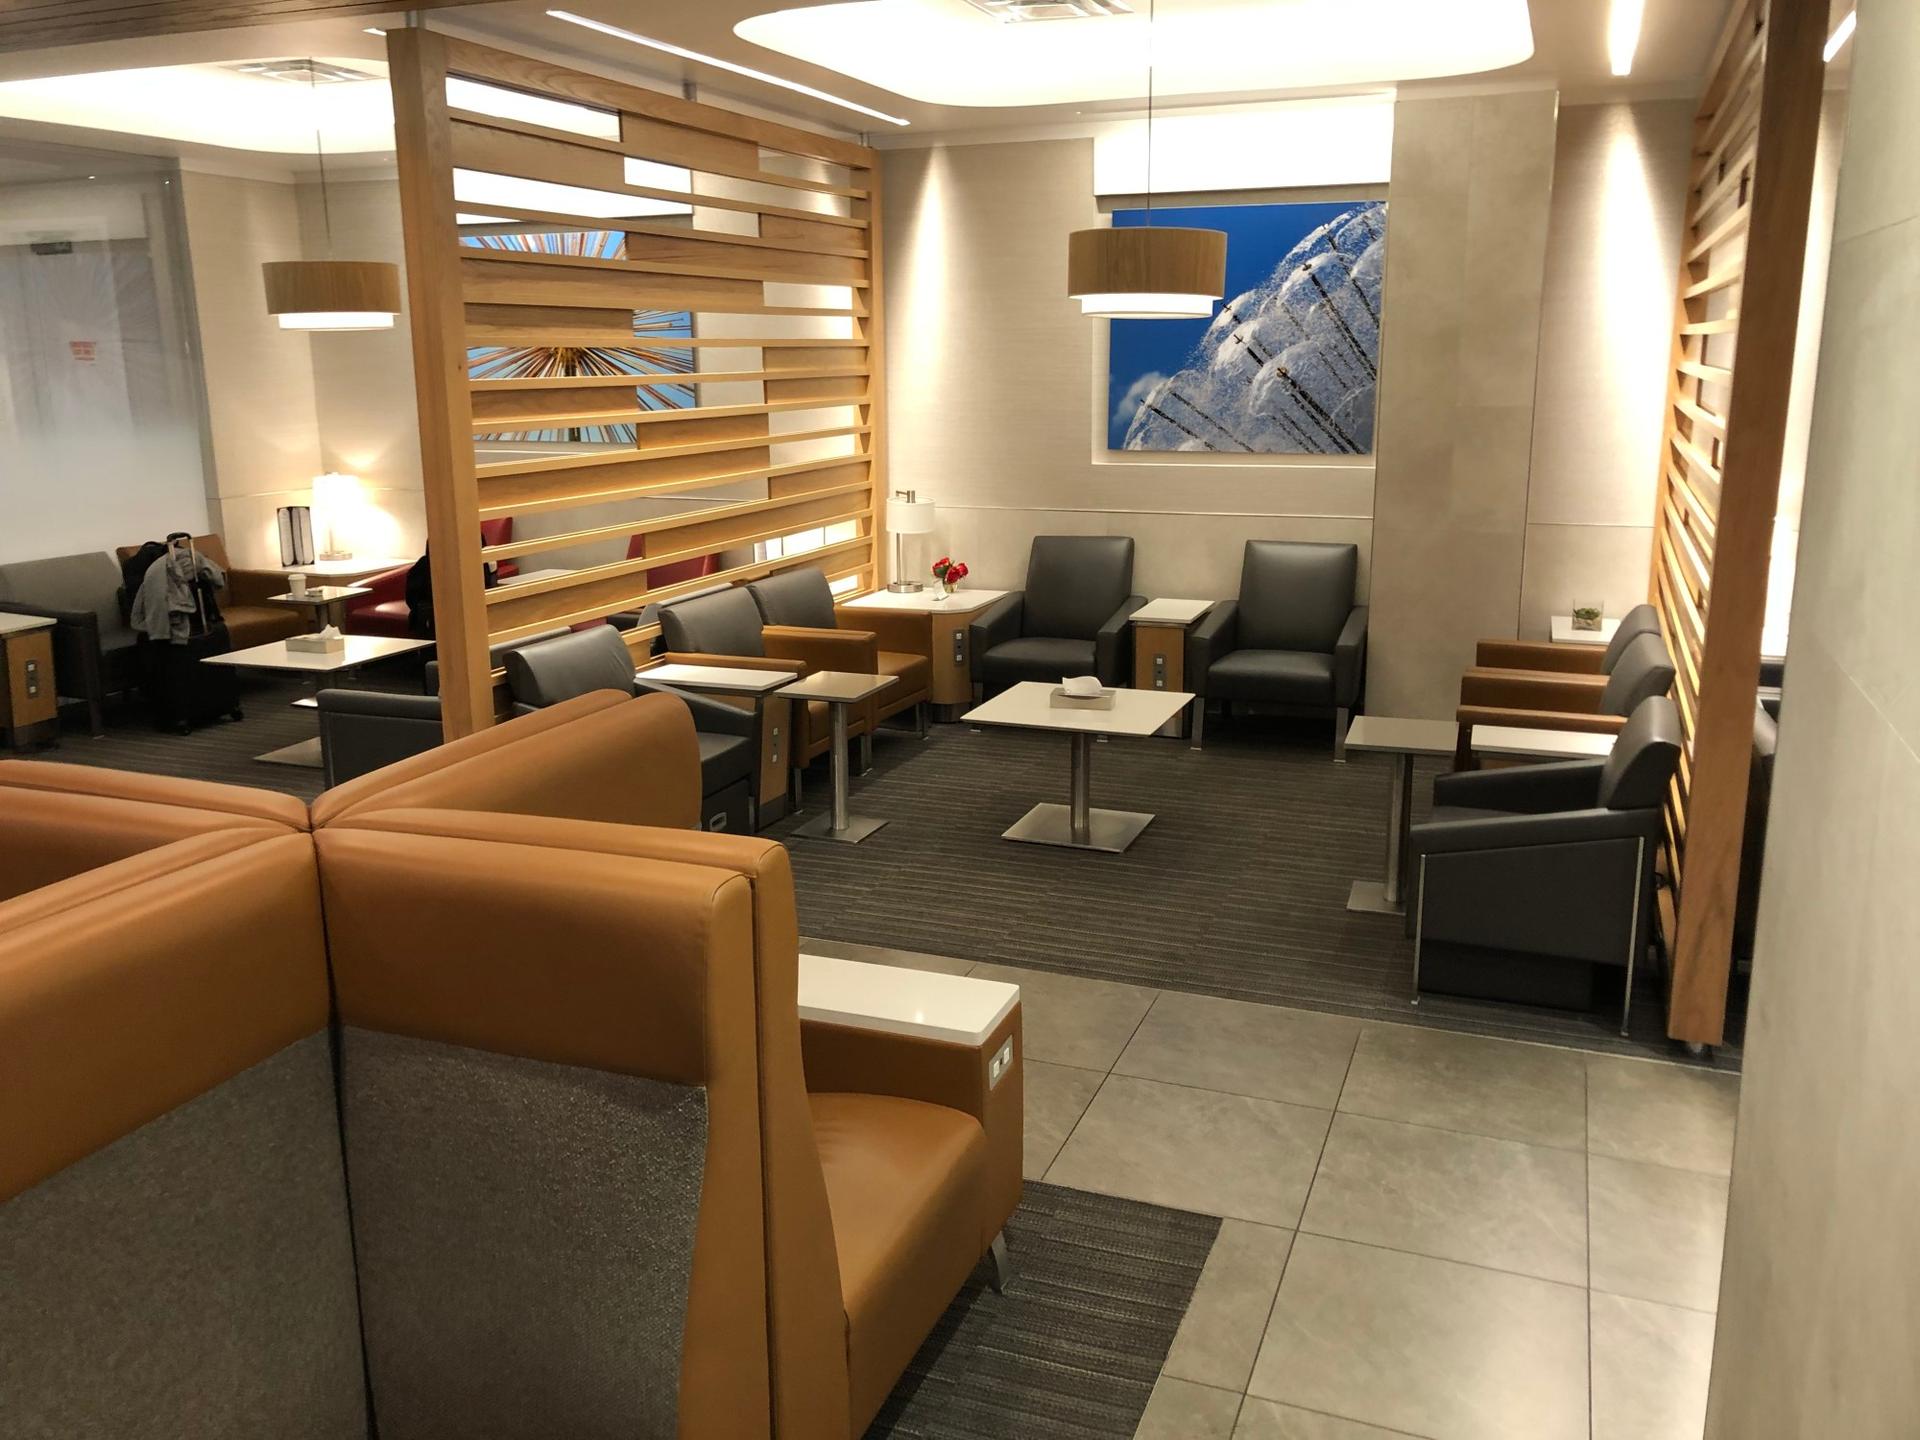 American Airlines Admirals Club image 5 of 13